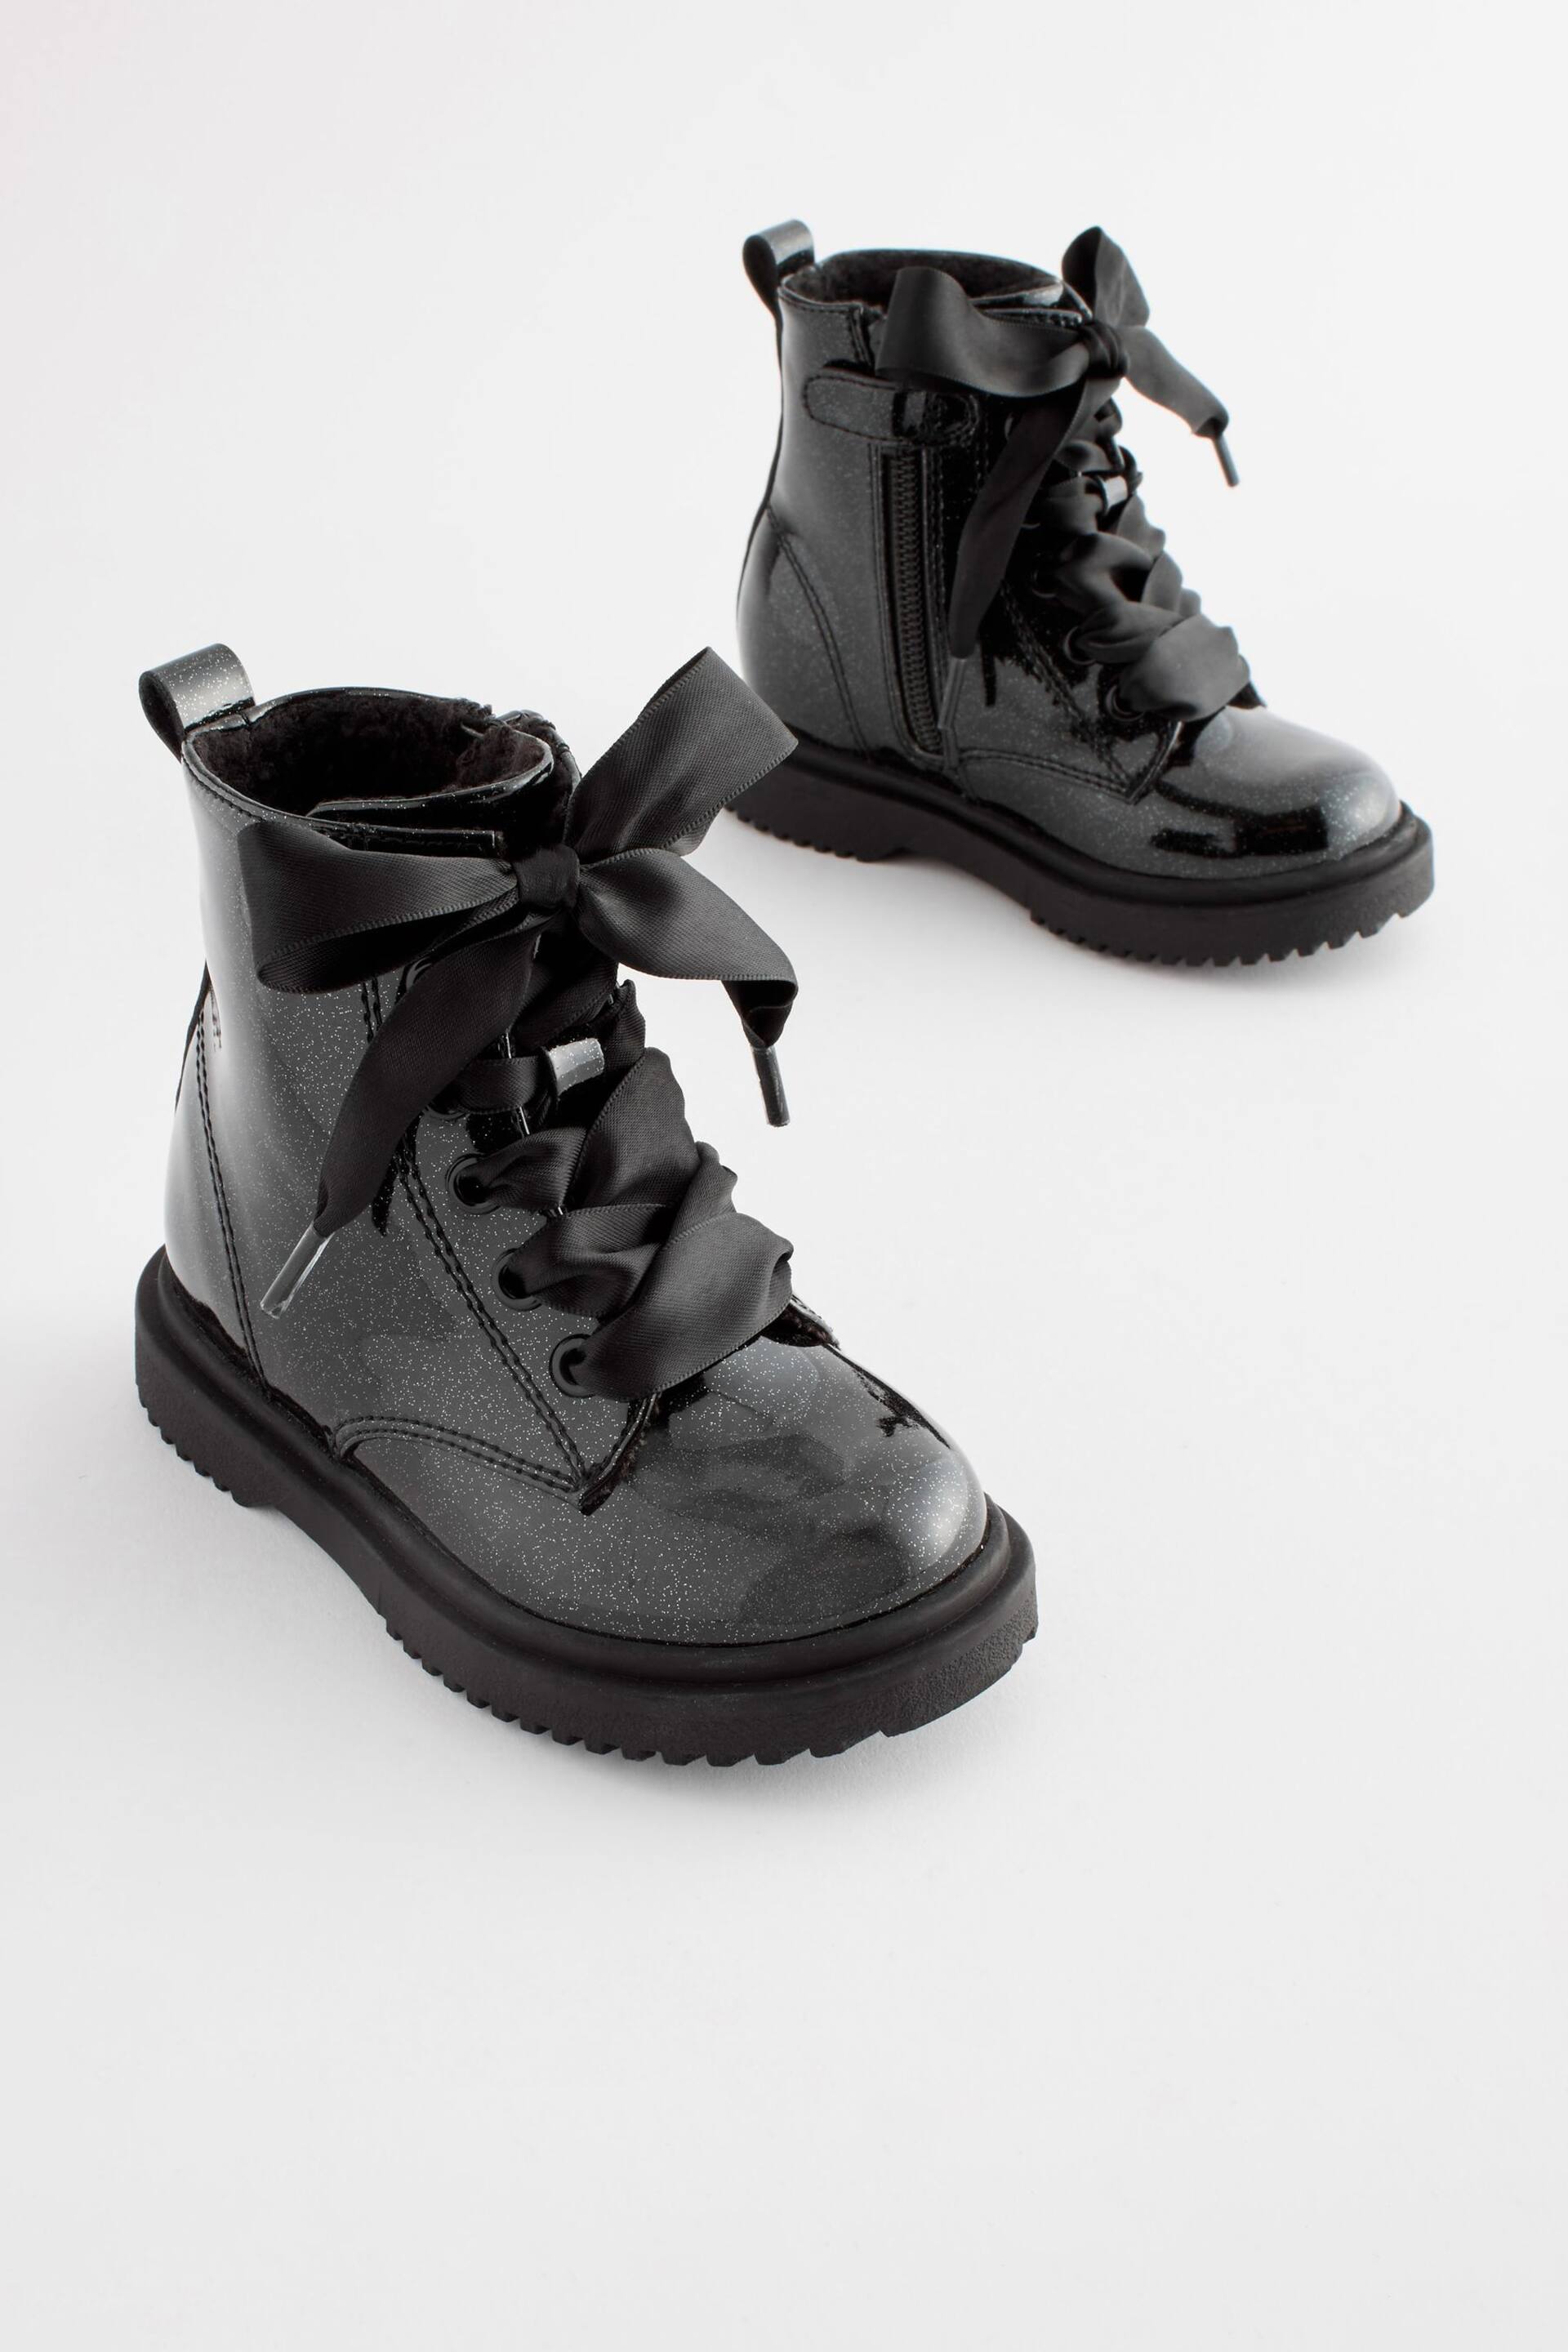 Black Patent Wide Fit (G) Warm Lined Lace-Up Boots - Image 1 of 6